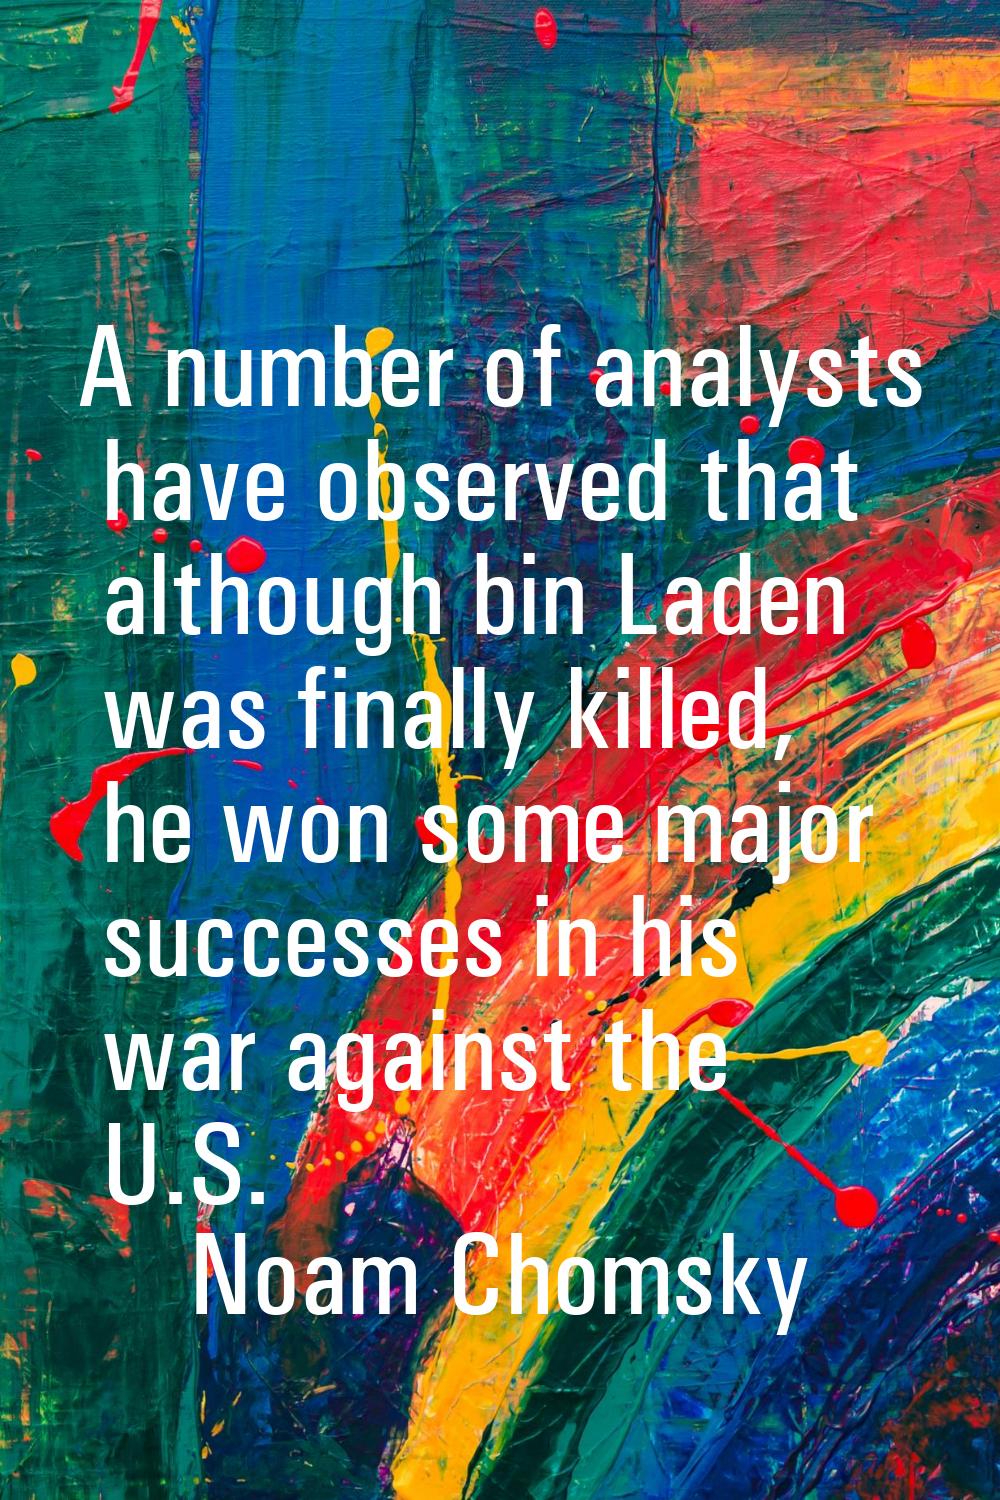 A number of analysts have observed that although bin Laden was finally killed, he won some major su